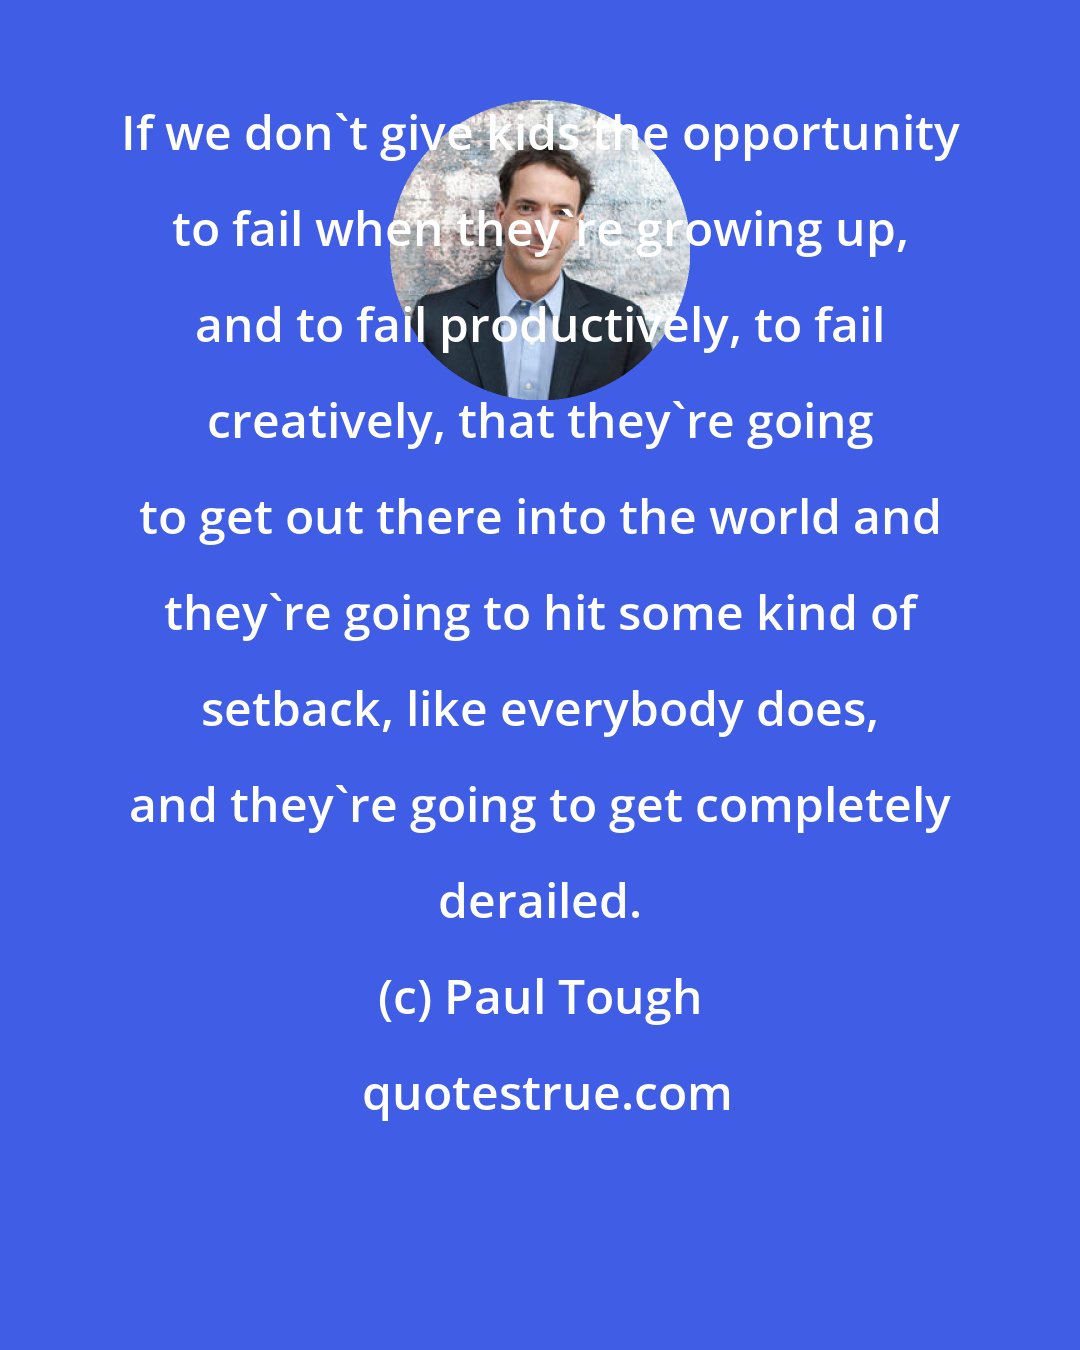 Paul Tough: If we don't give kids the opportunity to fail when they're growing up, and to fail productively, to fail creatively, that they're going to get out there into the world and they're going to hit some kind of setback, like everybody does, and they're going to get completely derailed.